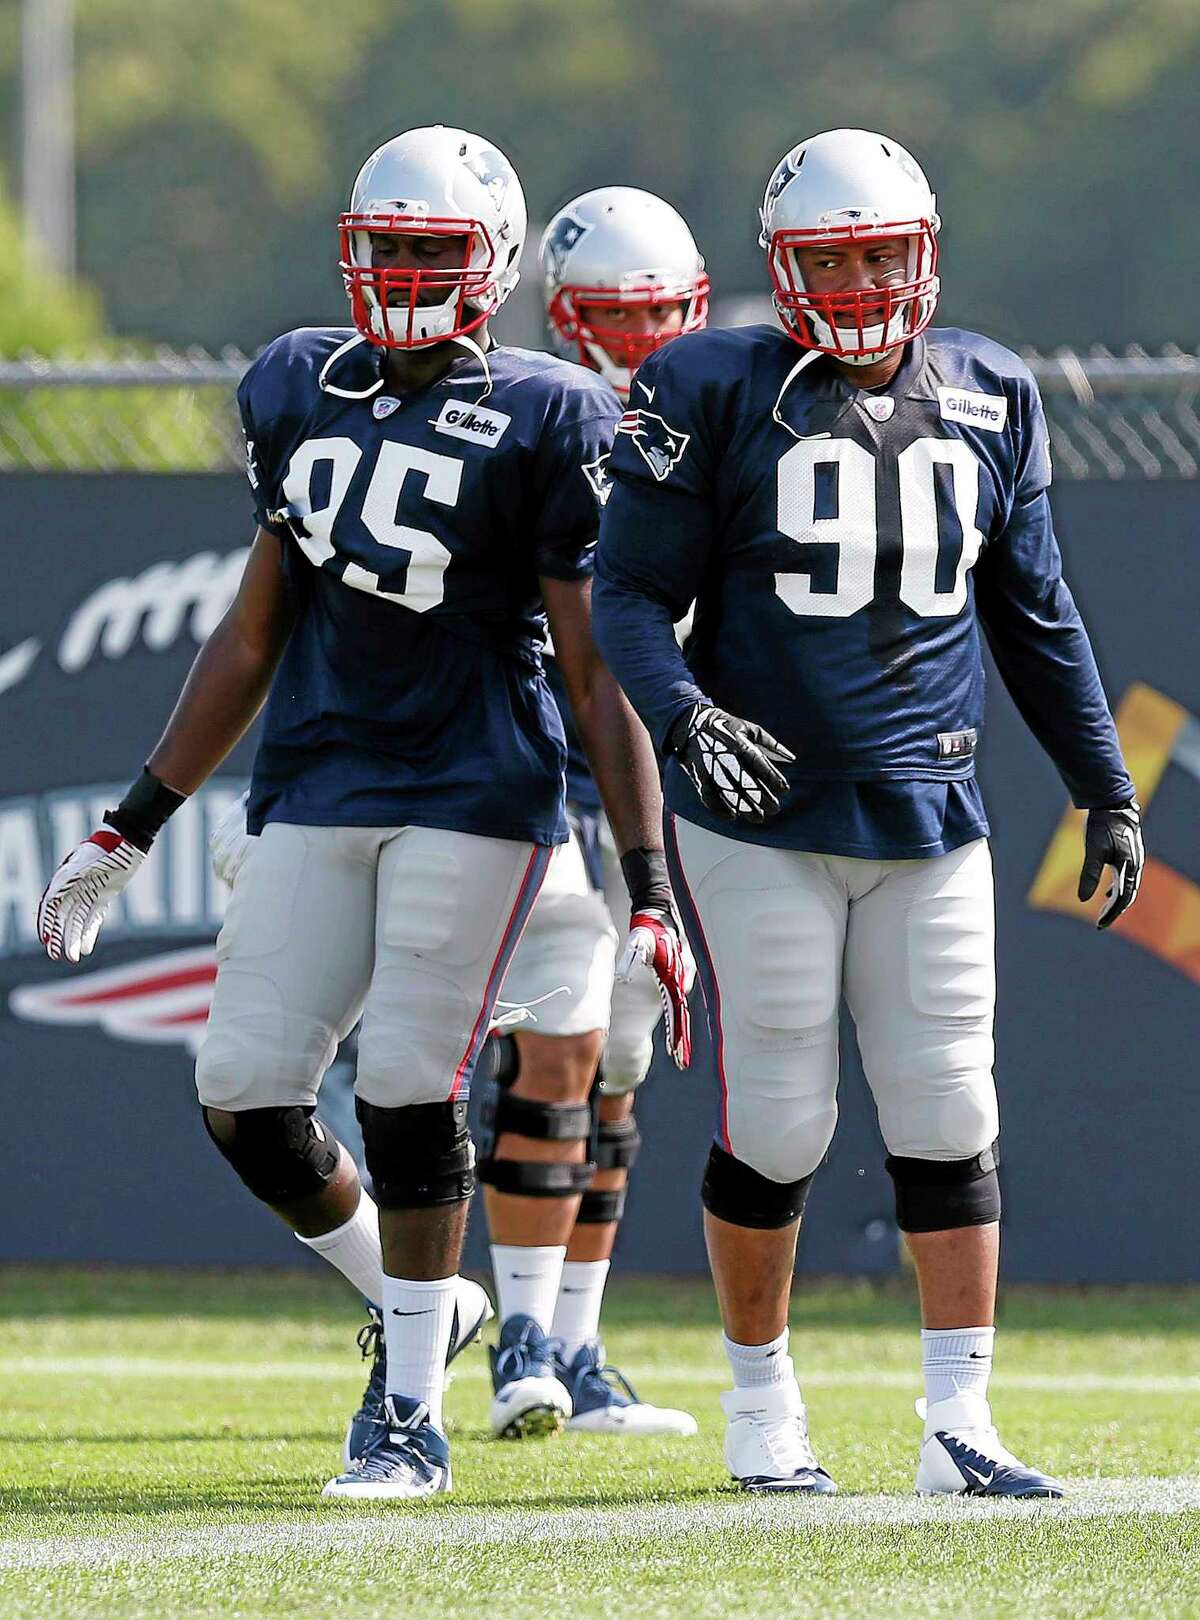 New England Patriots defensive end Chandler Jones (95) and linebacker Will Smith prepare to run a drill during Saturday’s practice in Foxborough, Mass.